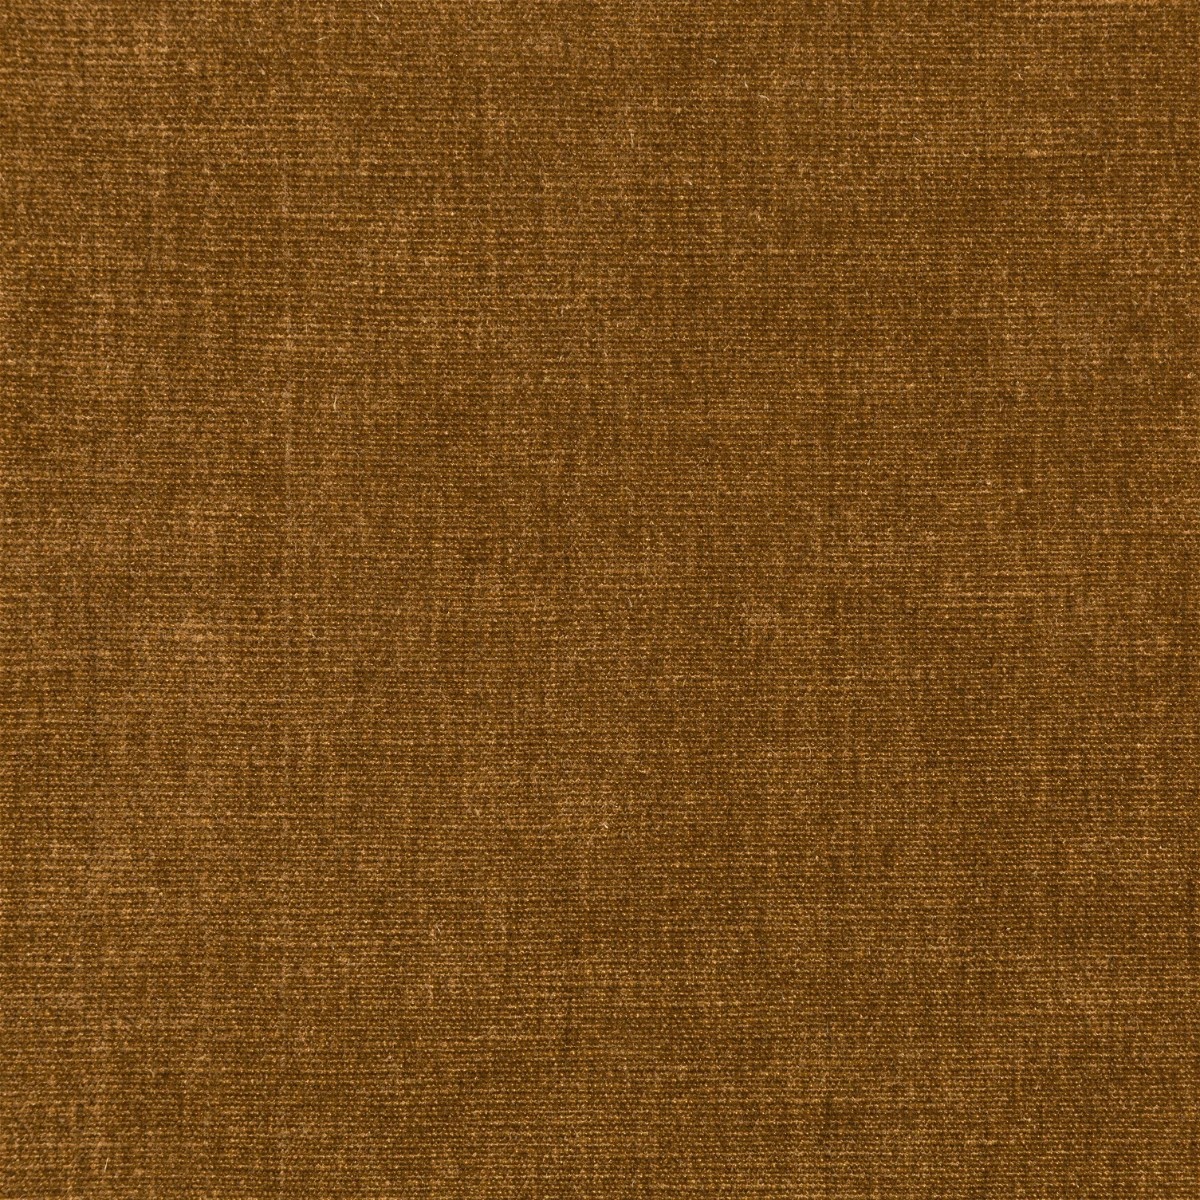 The image of an Performance Chenille Fabric product